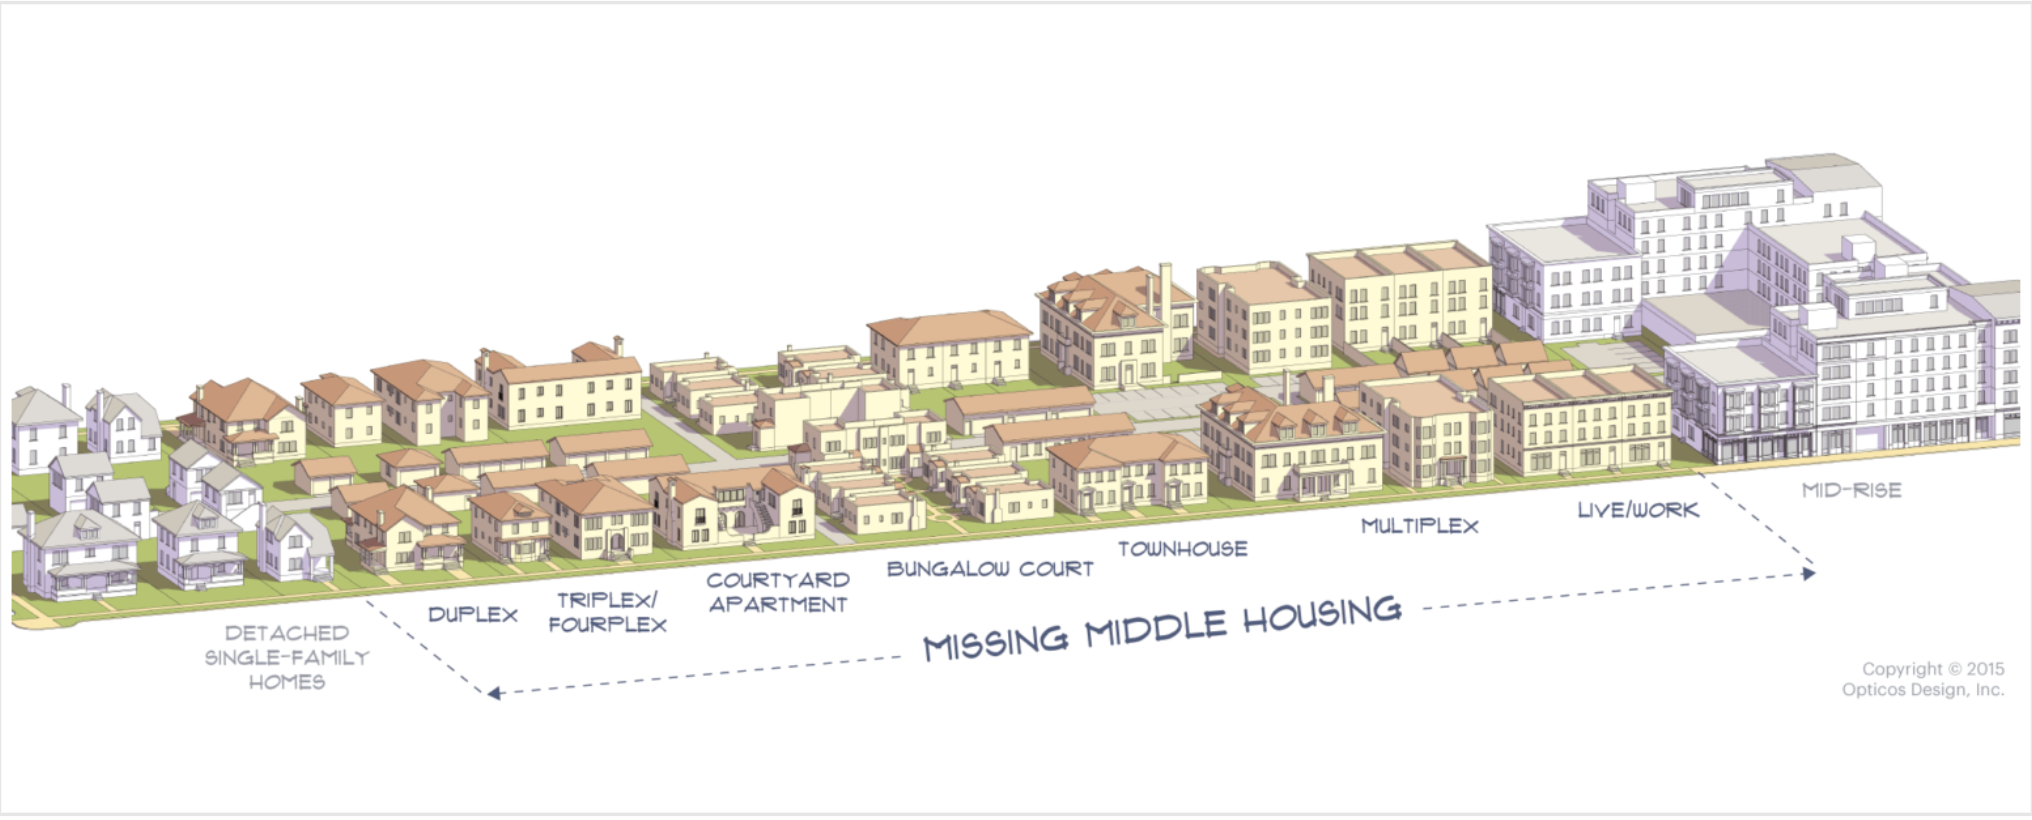 Take Action: Show your support for missing middle housing